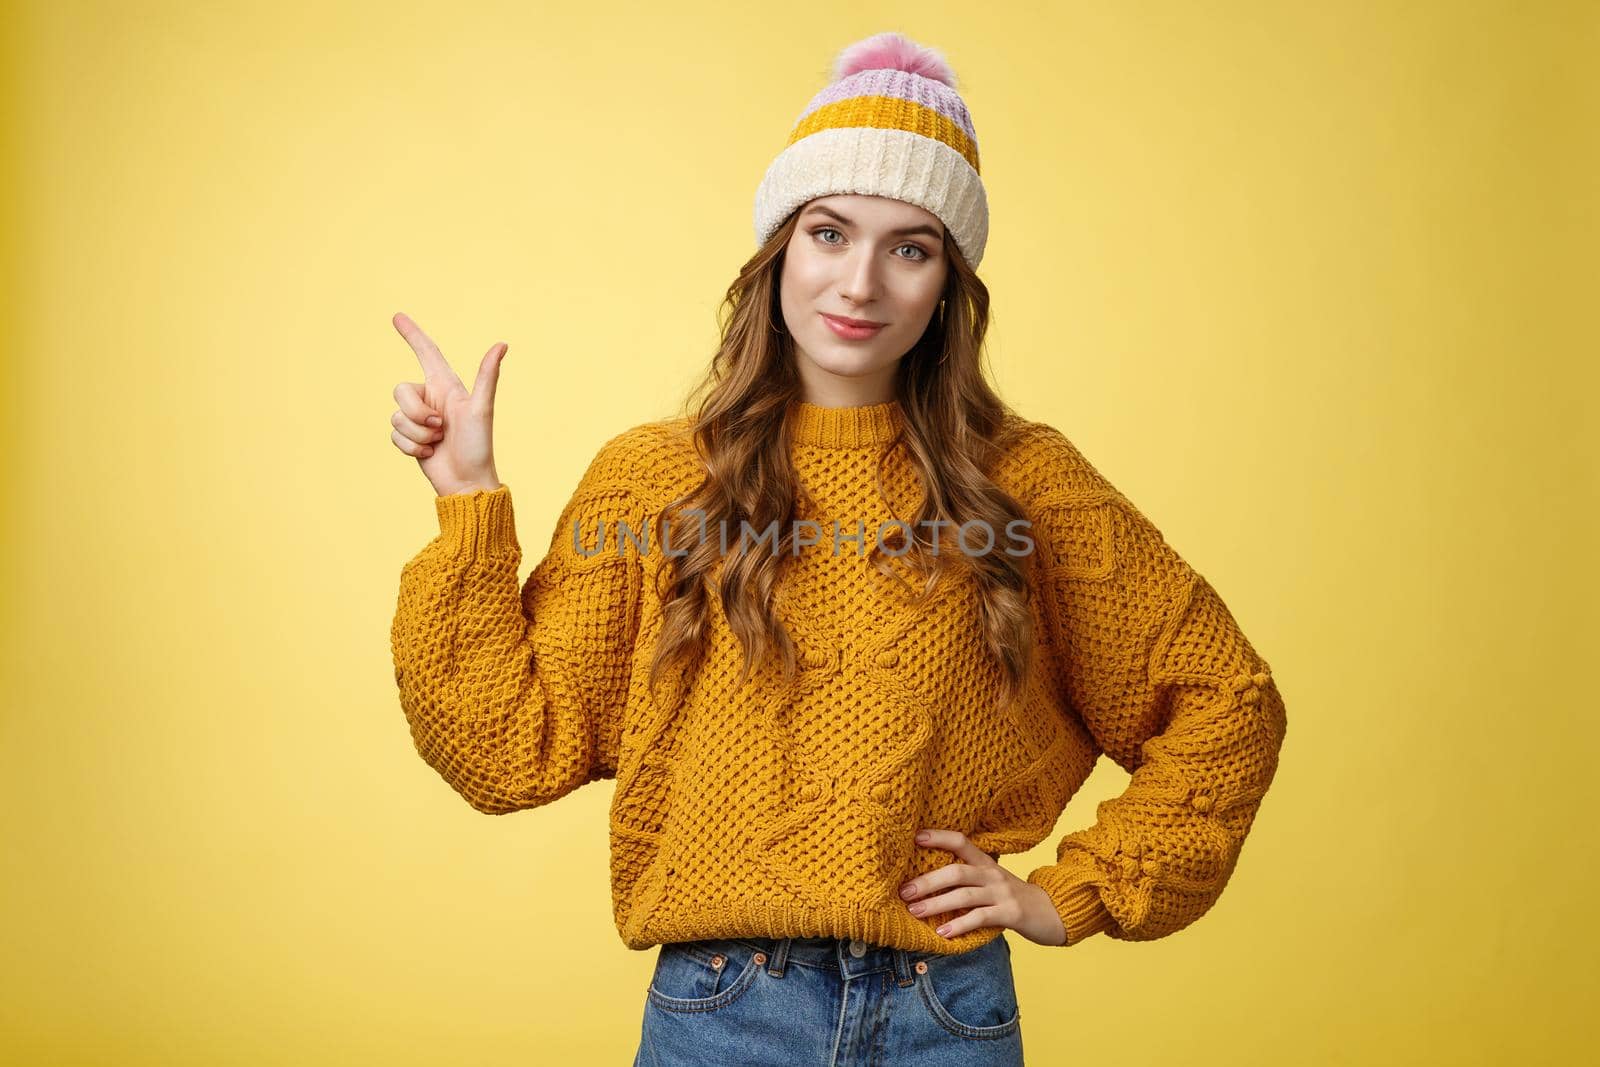 Confident good-looking young female friend telling you buy product immidietely pointing upper left corner smiling hold hand waist self-assured, employee help client pick best merch, yellow background.